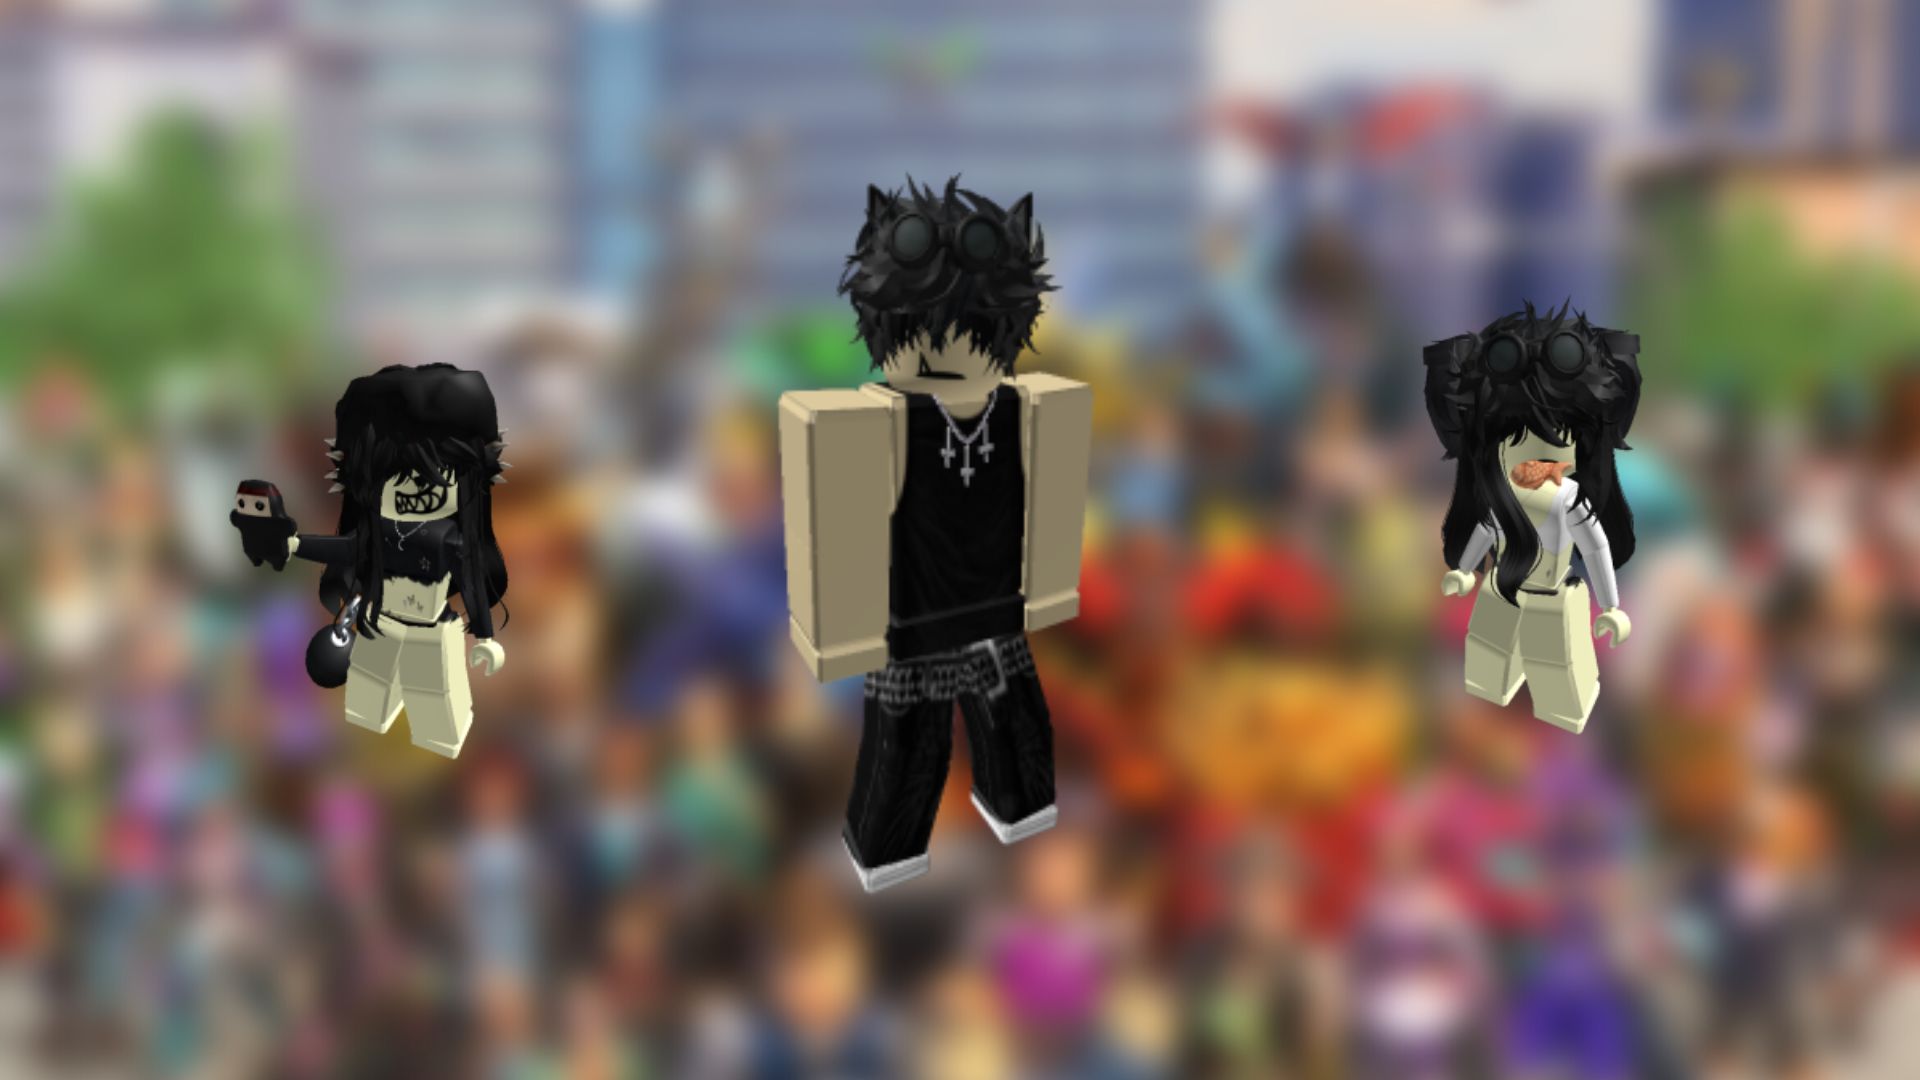 Pin by Elmiramagomedovadk on Милые рисунки  Roblox pictures, Roblox emo  outfits, Emo roblox avatar